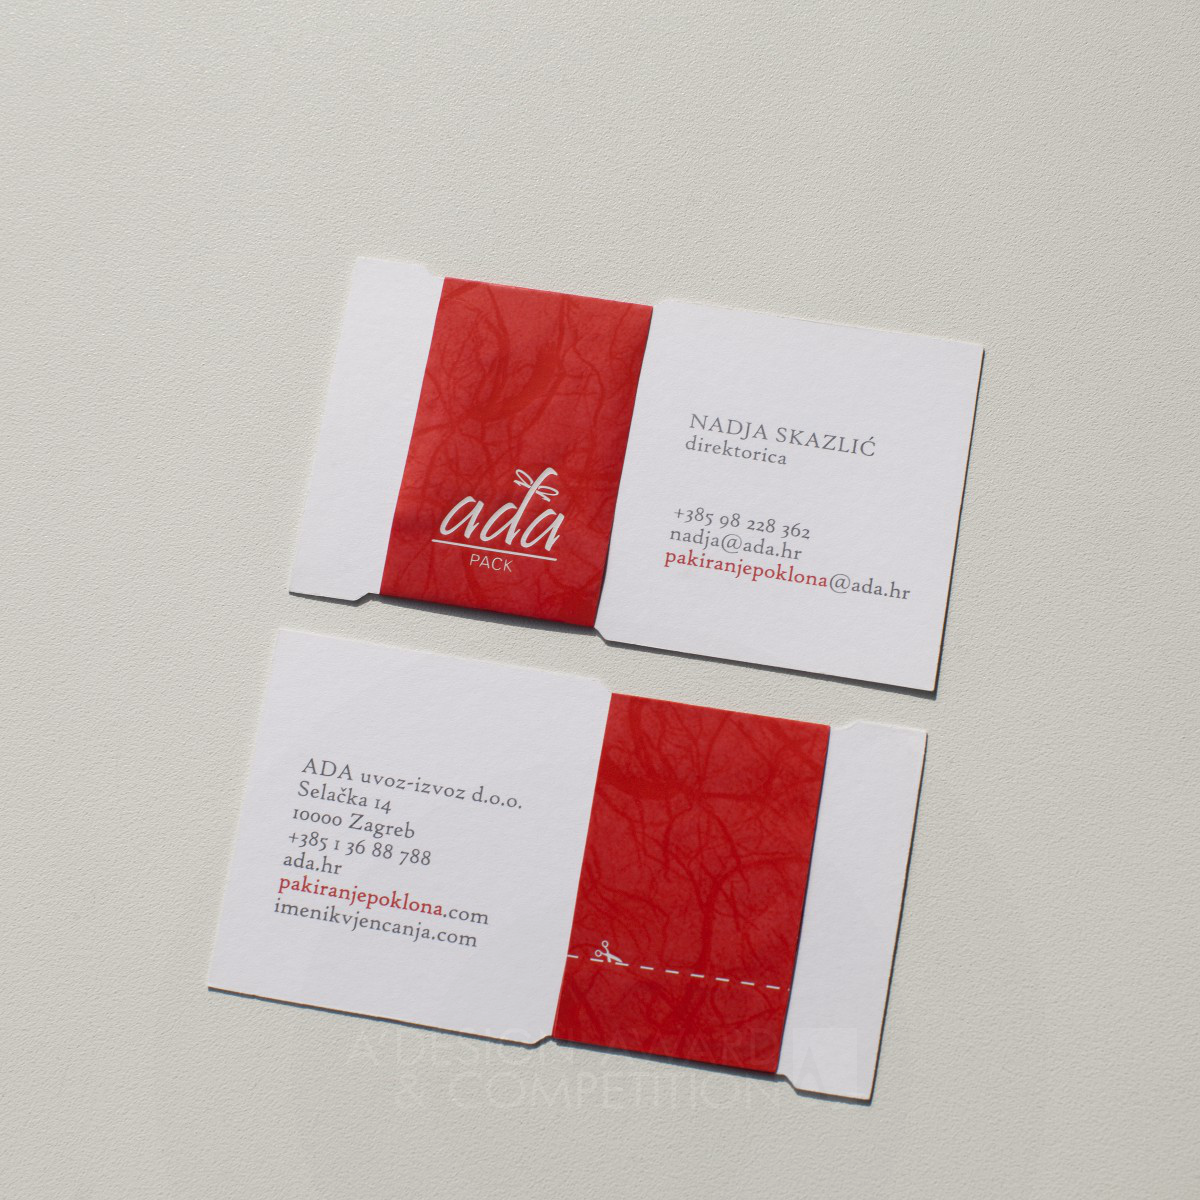 Ada Pack Business card by Antonio Tepic